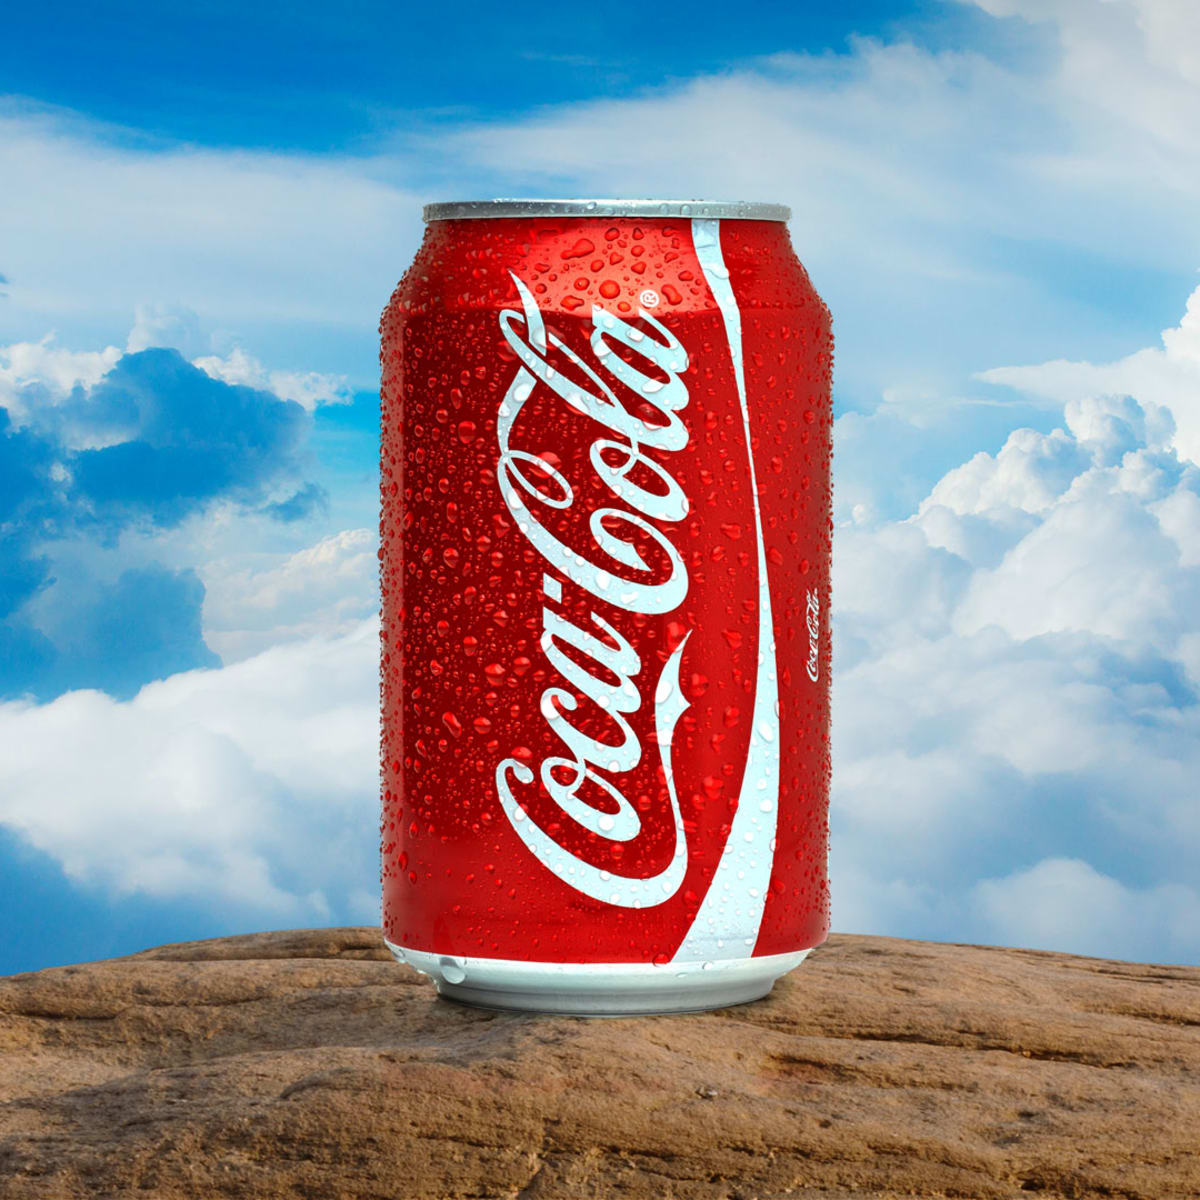 Coca-Cola-Owned Brand Expands Its Bold Take On a Novel Drink - TheStreet